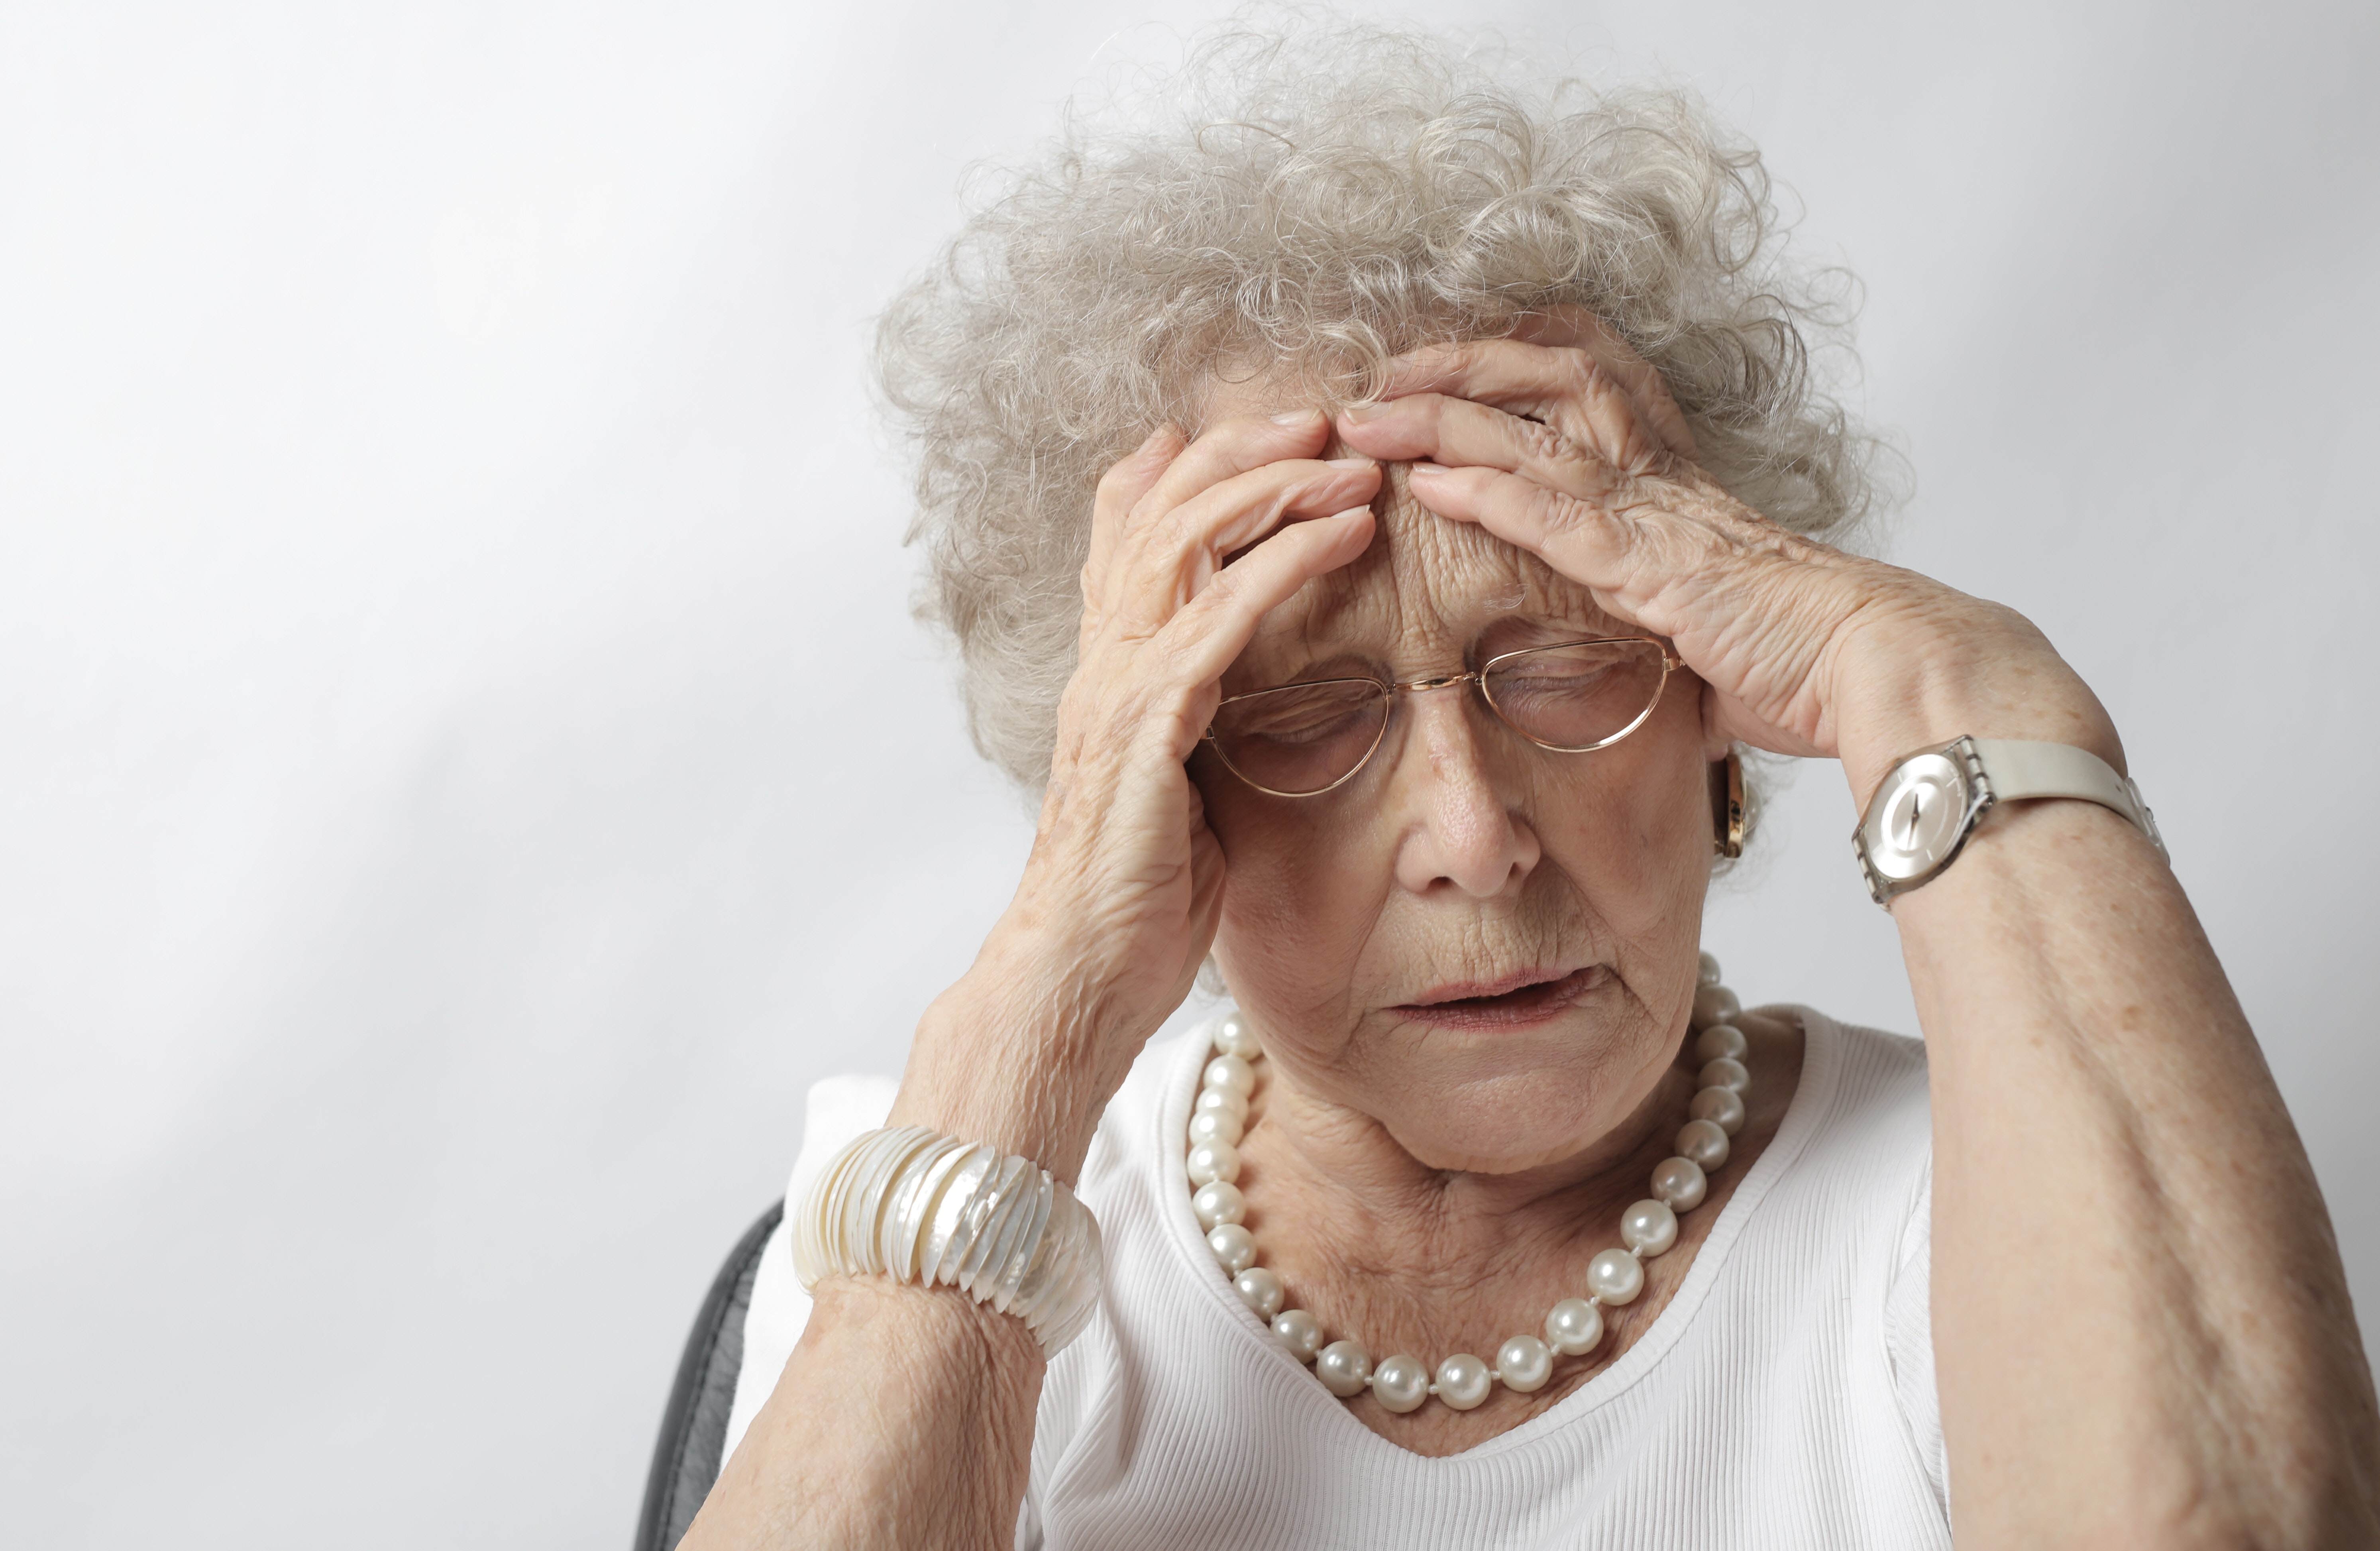 an older woman with white curly hair, wearing a white t-shirt and a pearl necklace, clutches at her forehead with both hands in distress